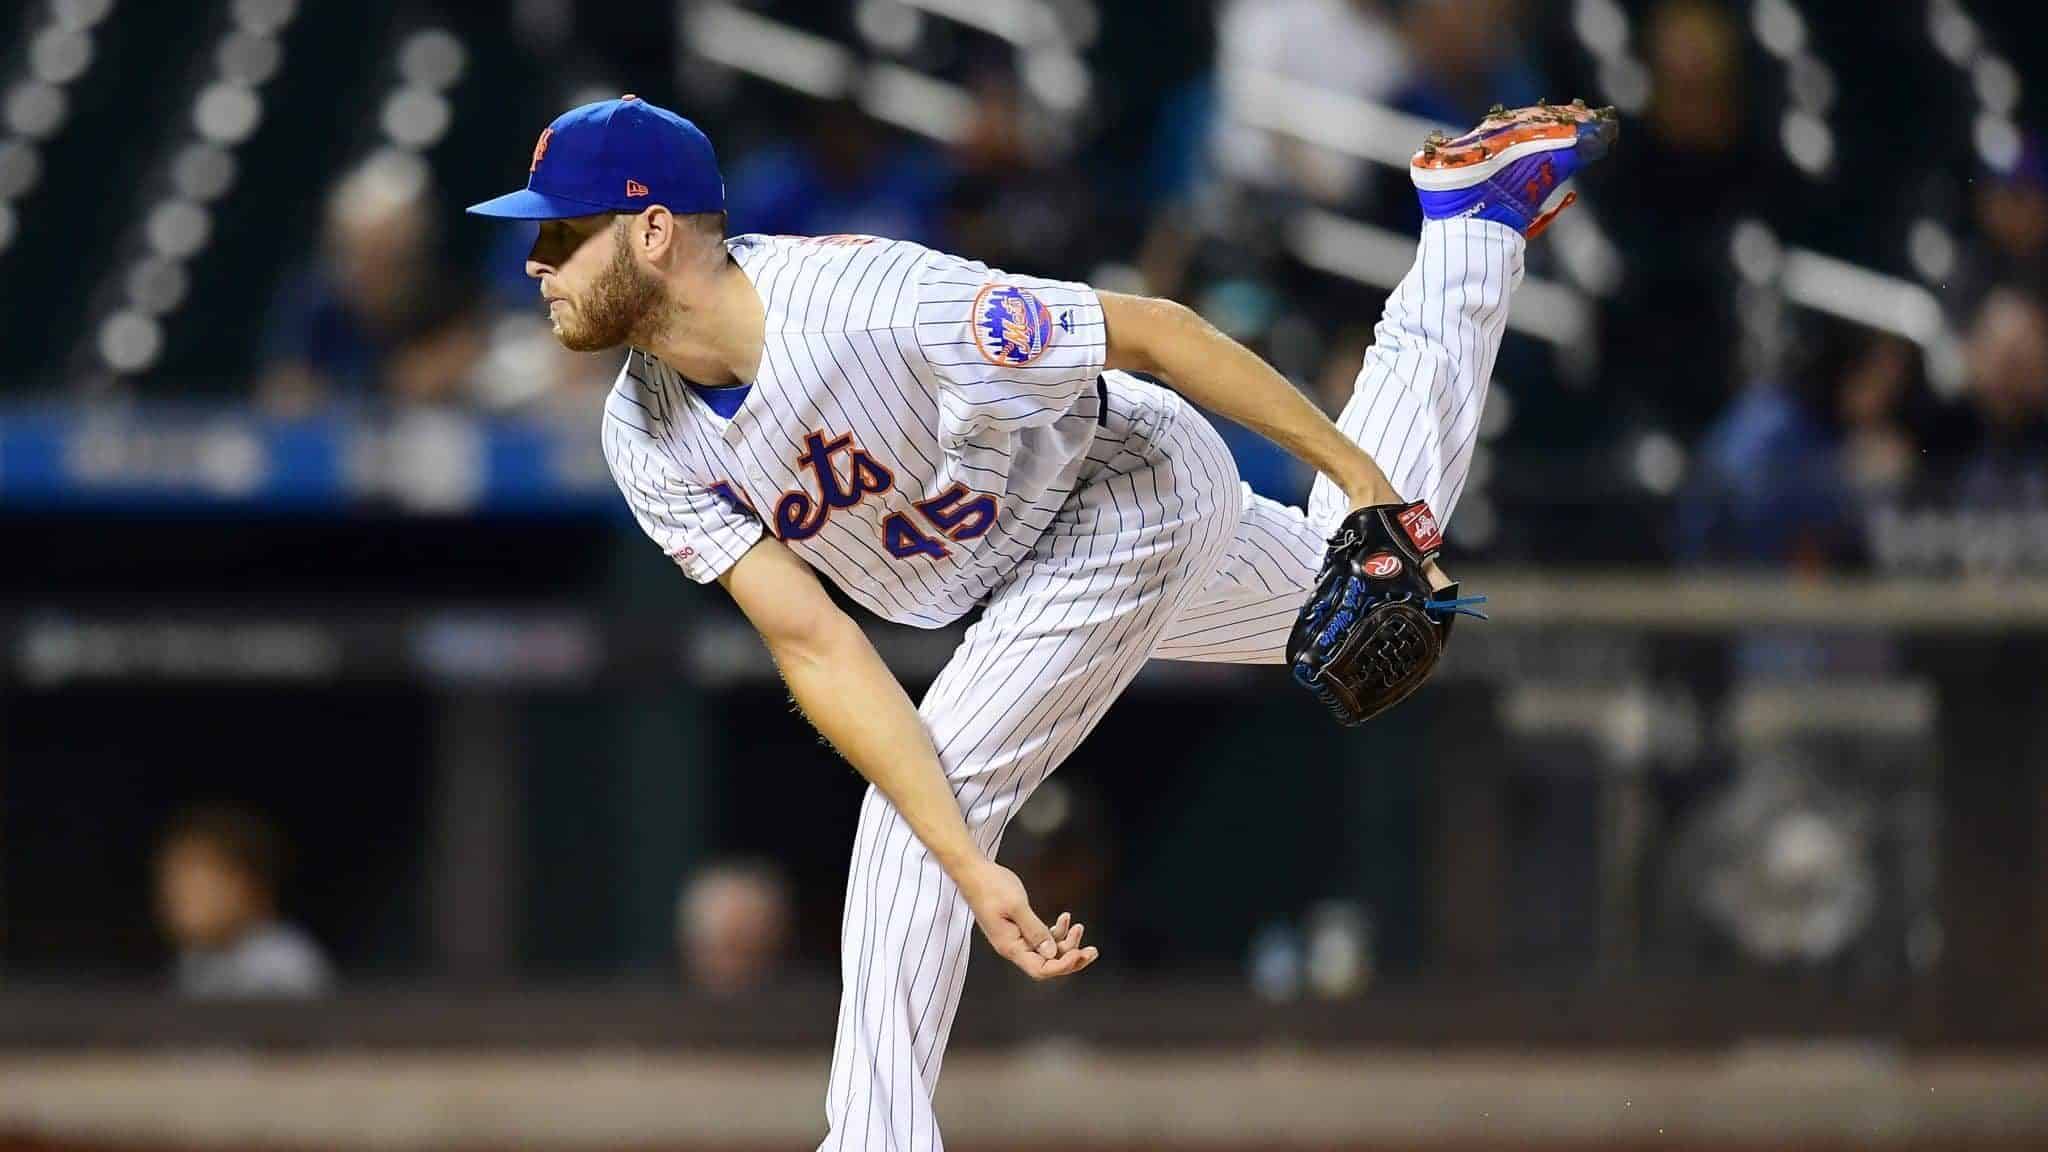 NEW YORK, NEW YORK - SEPTEMBER 26: Zack Wheeler #45 of the New York Mets follows through with a pitch in the first inning of their game against the Miami Marlins at Citi Field on September 26, 2019 in the Flushing neighborhood of the Queens borough in New York City.